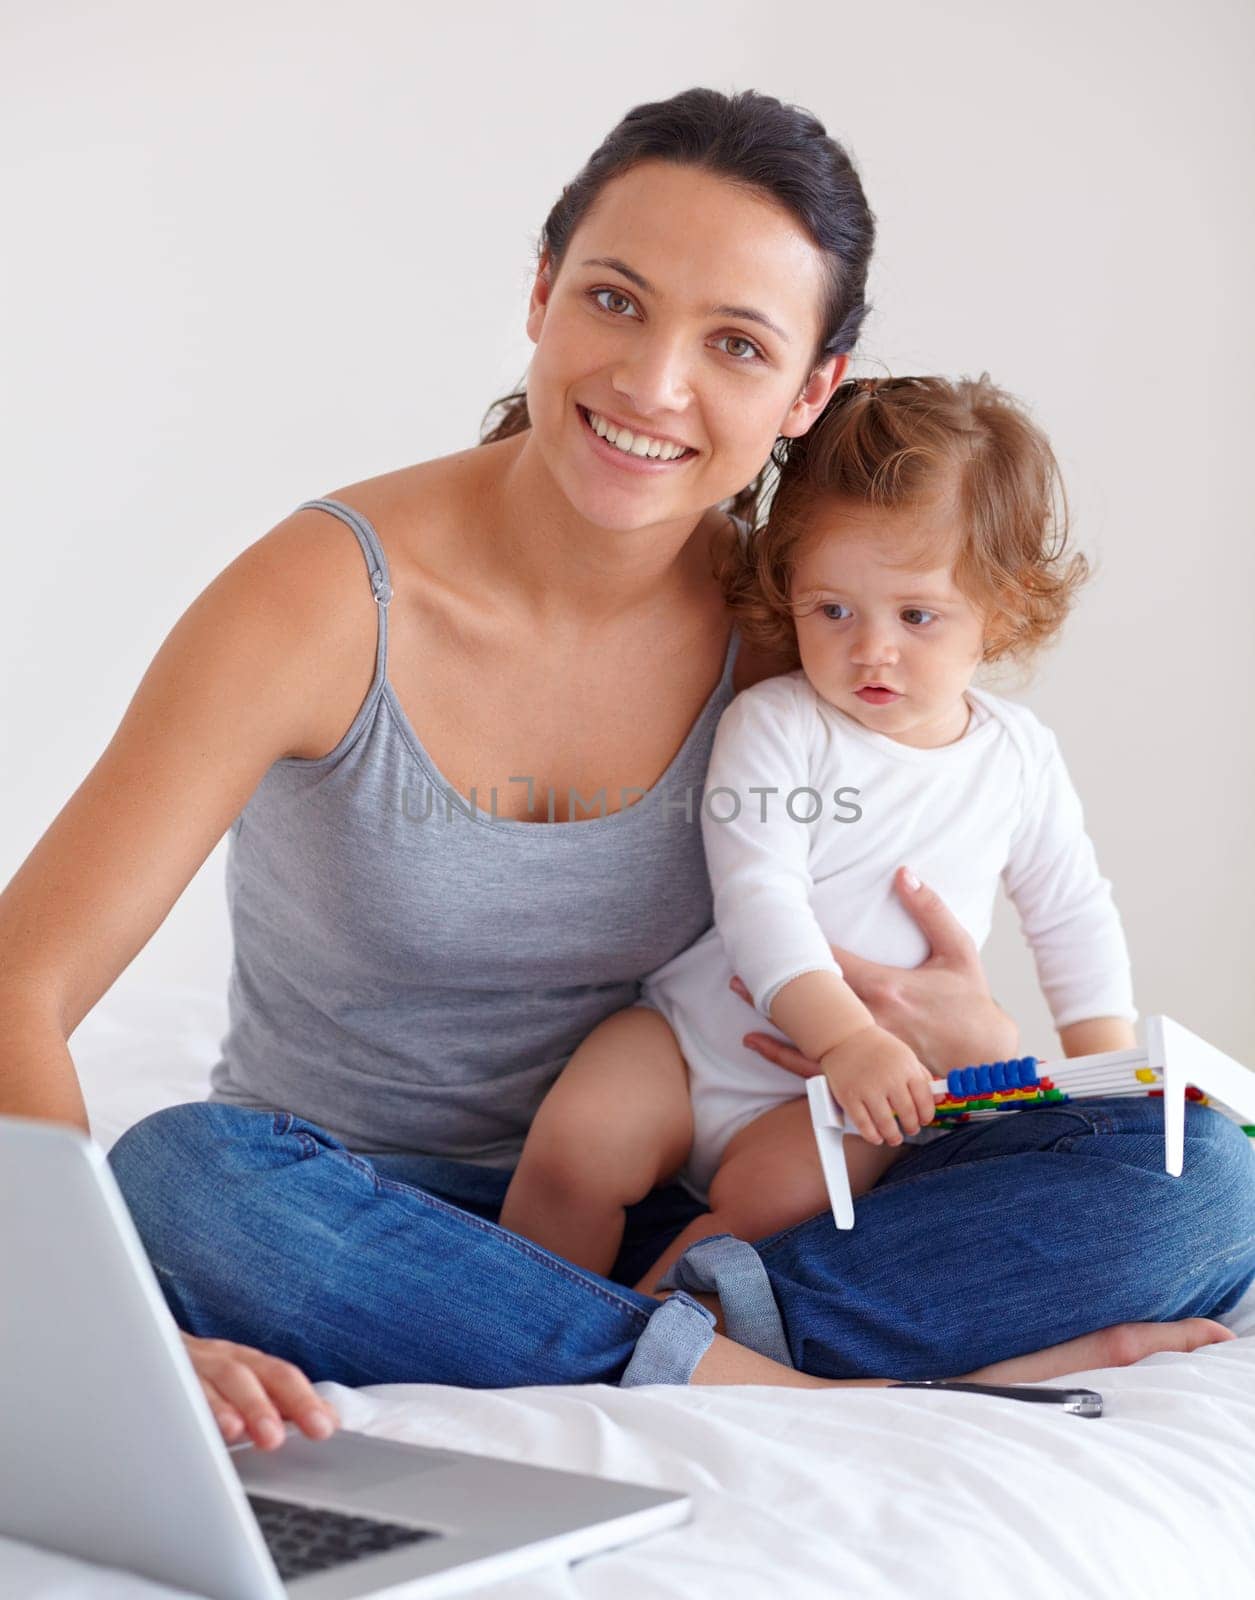 Portrait, baby and happy mother on laptop in bedroom for remote work, learning or education in home. Freelancer parent, computer and kid playing with abacus, care and toddler together with family.